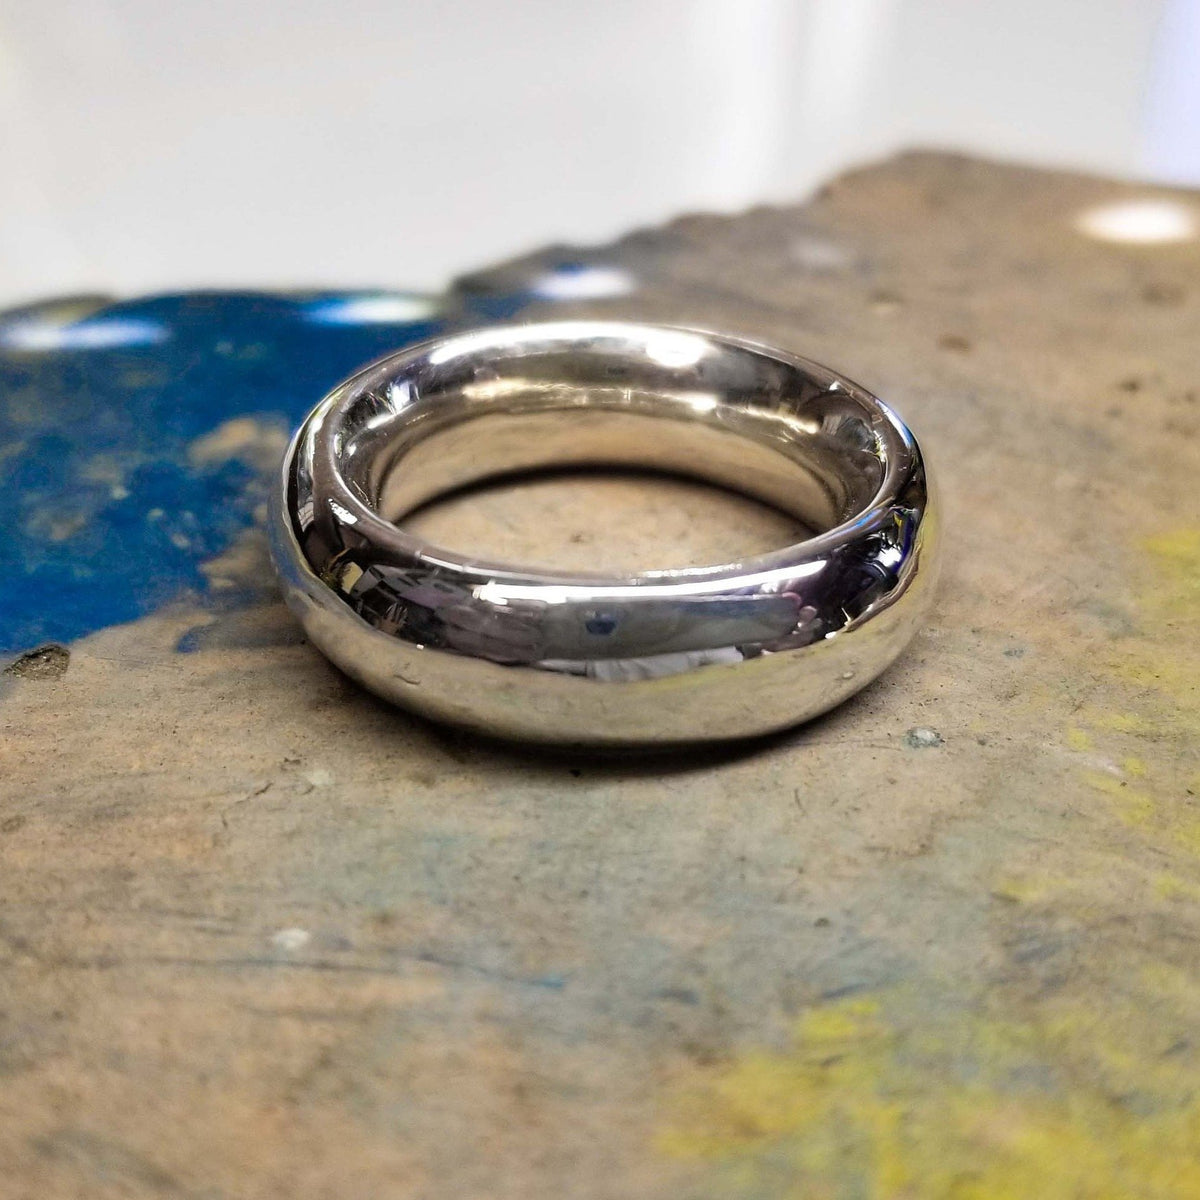 Fine silver Fat Moon ring. A thick band with a smooth inside